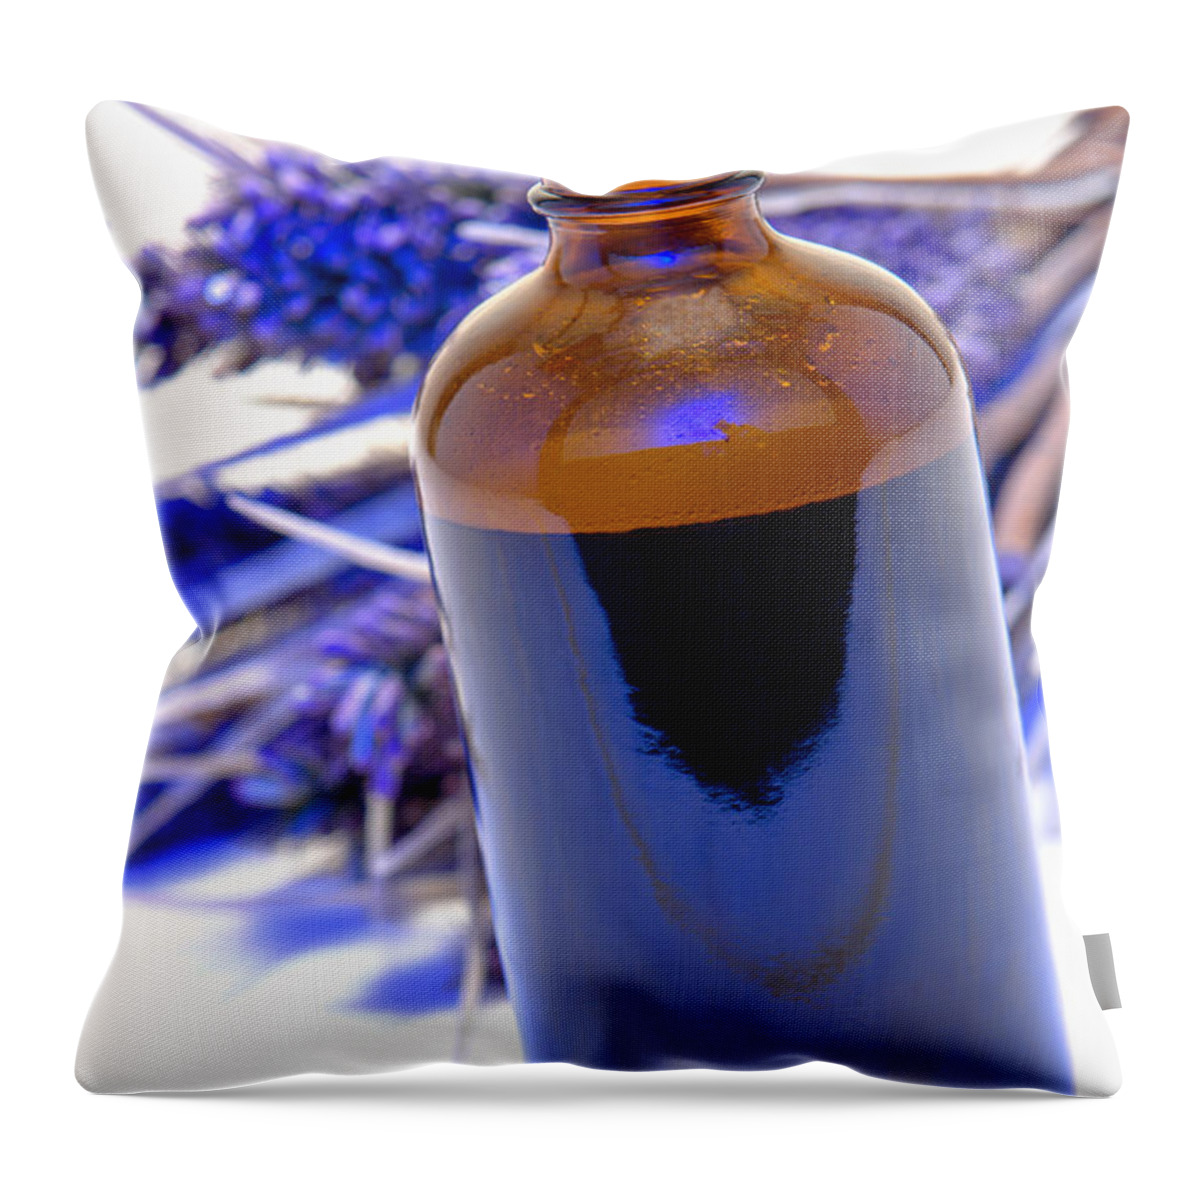 Aromatherapy Throw Pillow featuring the photograph Aromatherapy Bottle with Blue Flower Background by Olivier Le Queinec